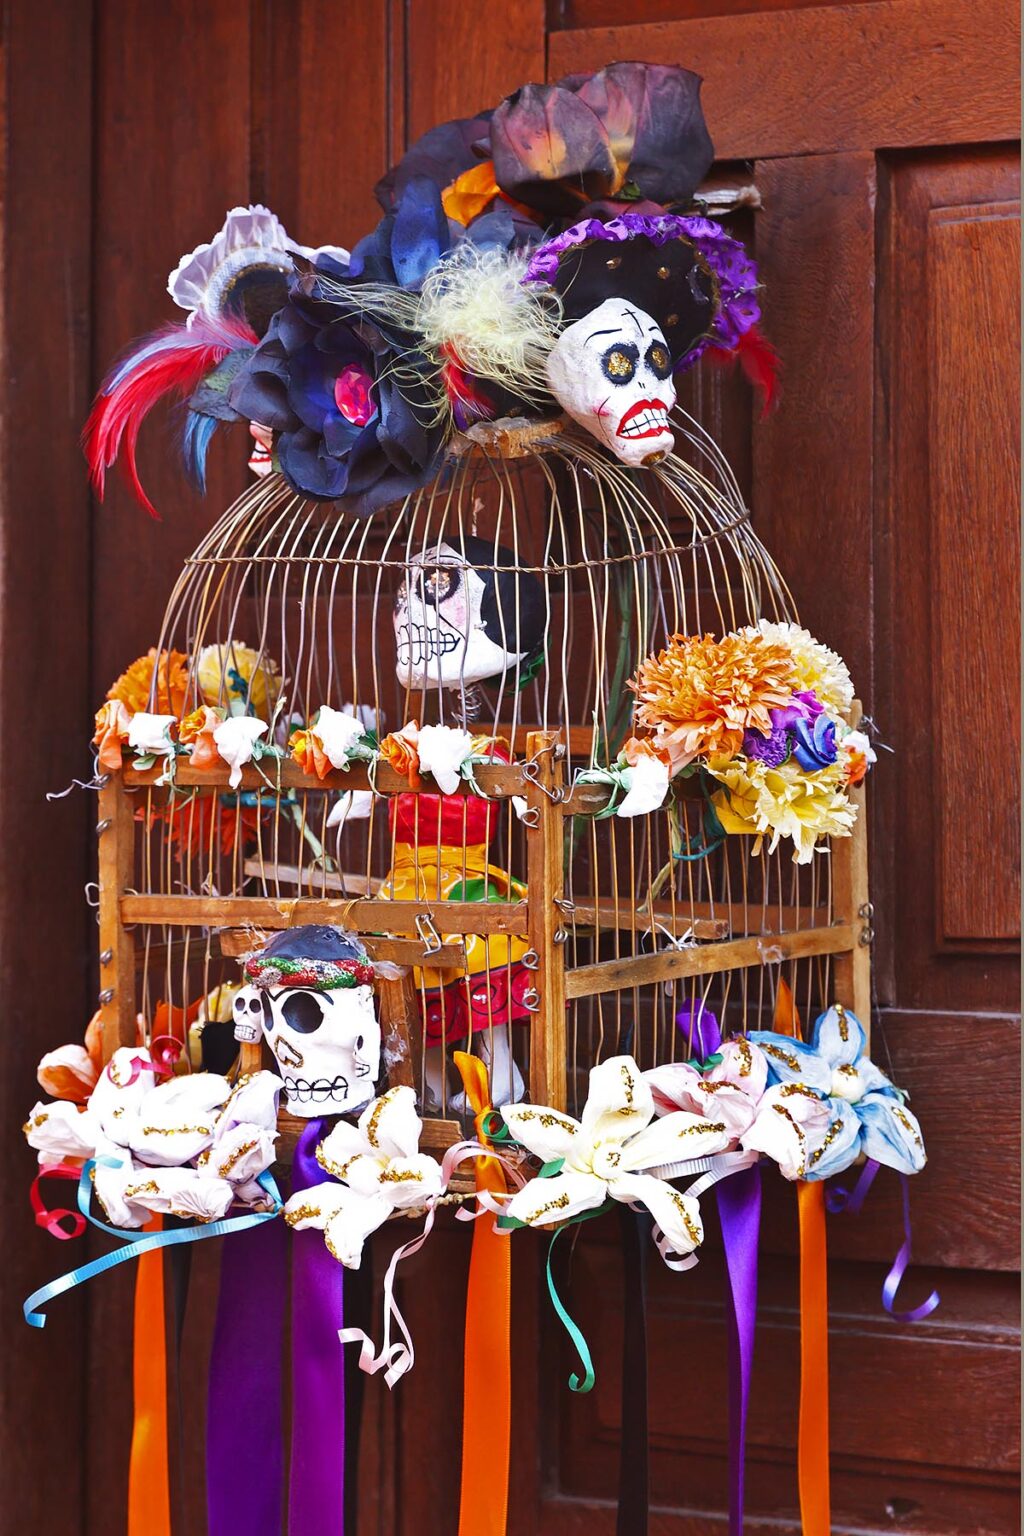 A BIRDCAGE dressed up for DAY OF THE DEAD - SAN MIGUEL DE ALLENDE, MEXICO